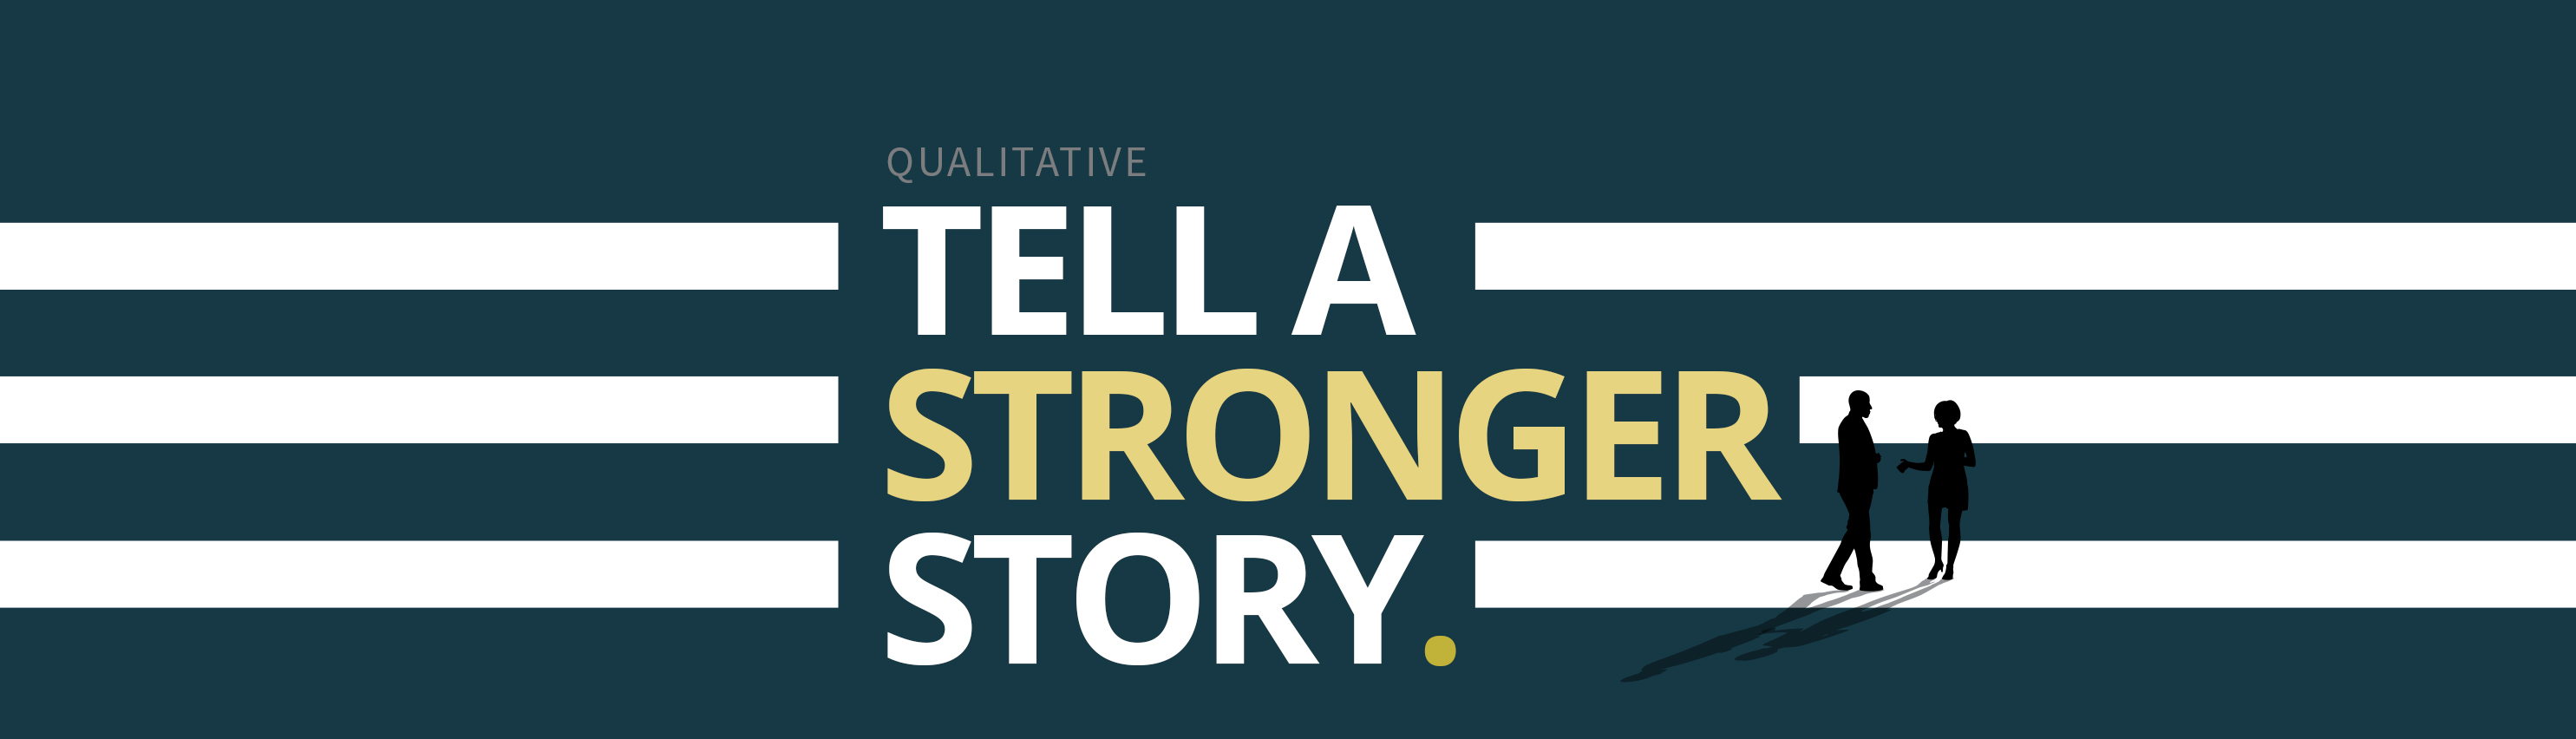 Tell A Stronger Story | Qualitative Research Methods | Meeting Street Insights